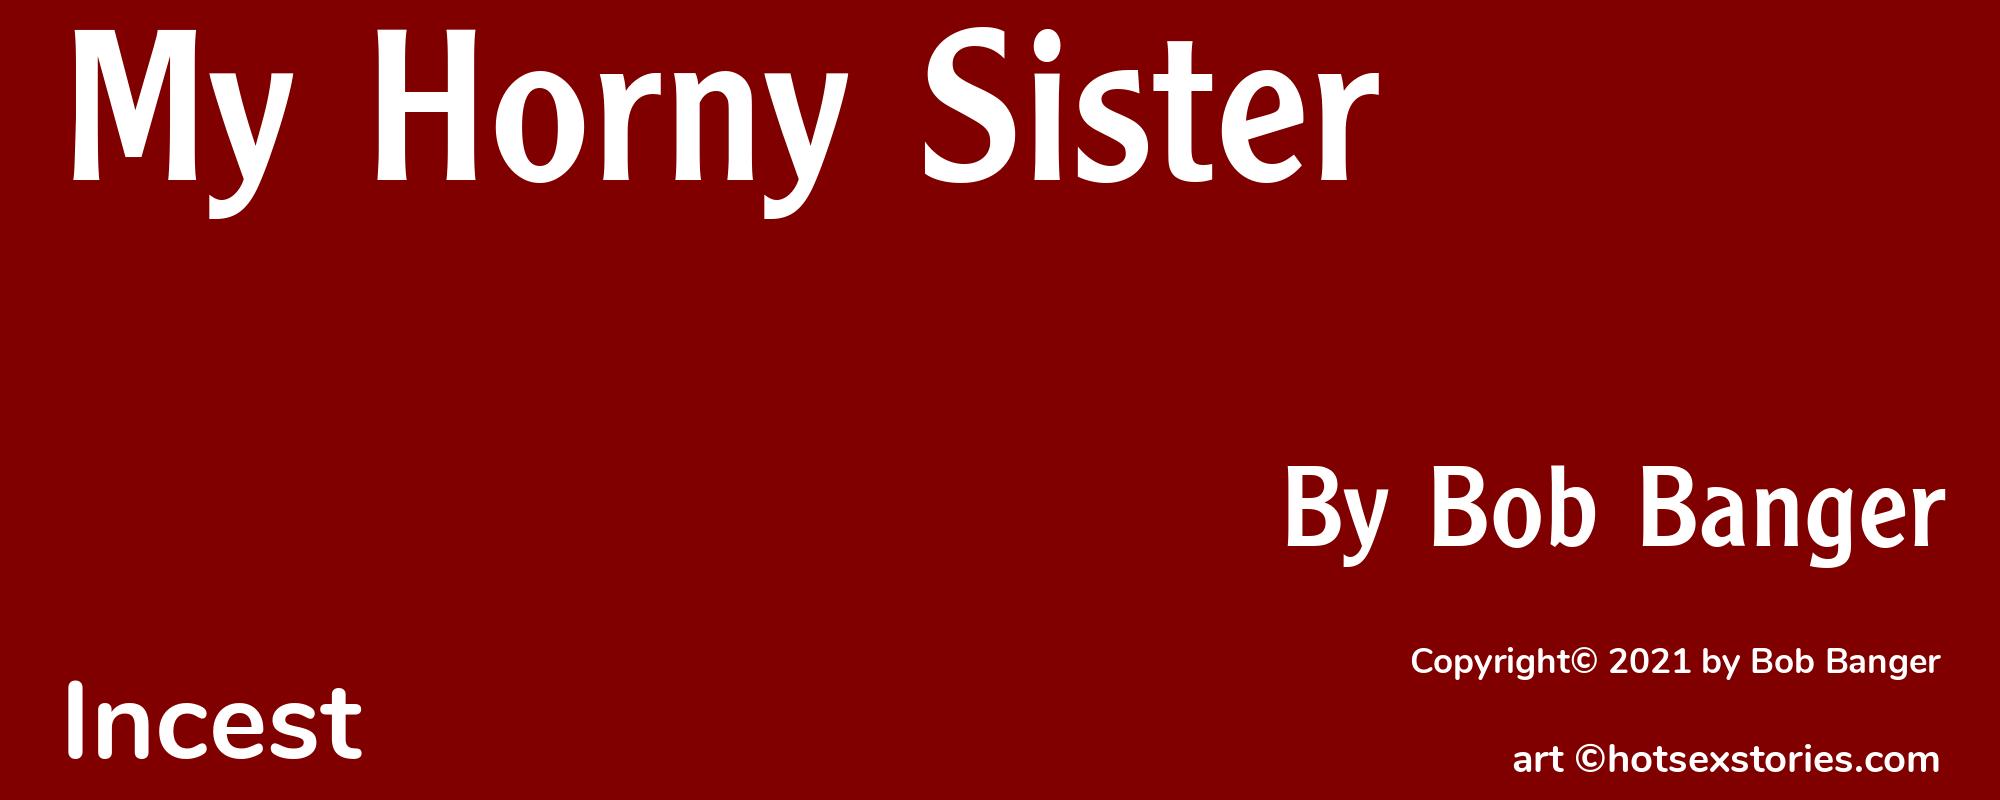 My Horny Sister - Cover